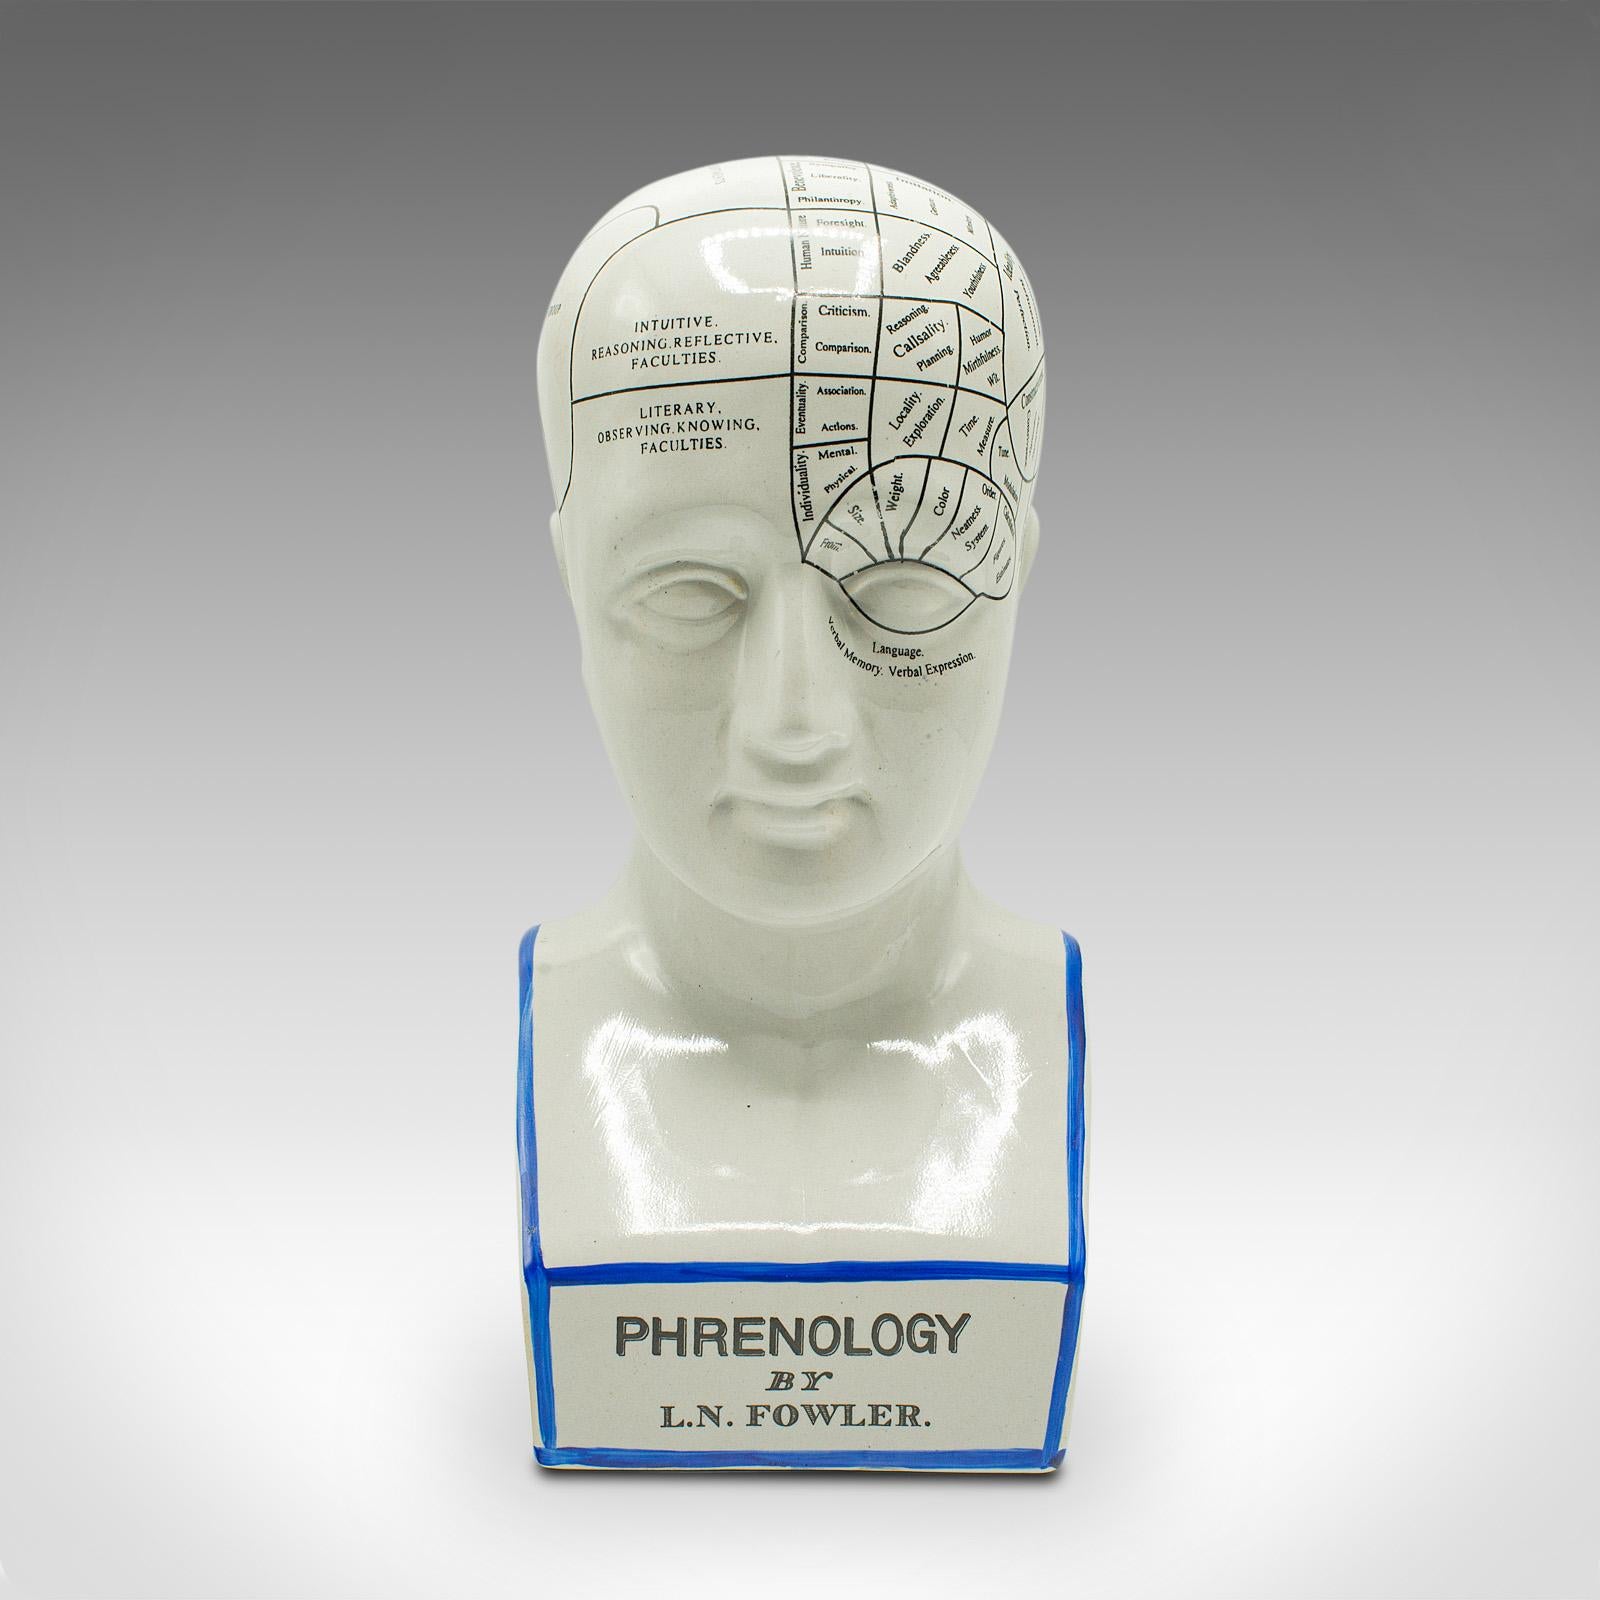 This is a vintage Phrenology head. An English, ceramic decorative bust, dating to the late 20th century.

Charming display of the 18th century science of Phrenology
Displays a desirable aged patina and in good order
Ceramic presents crisp white